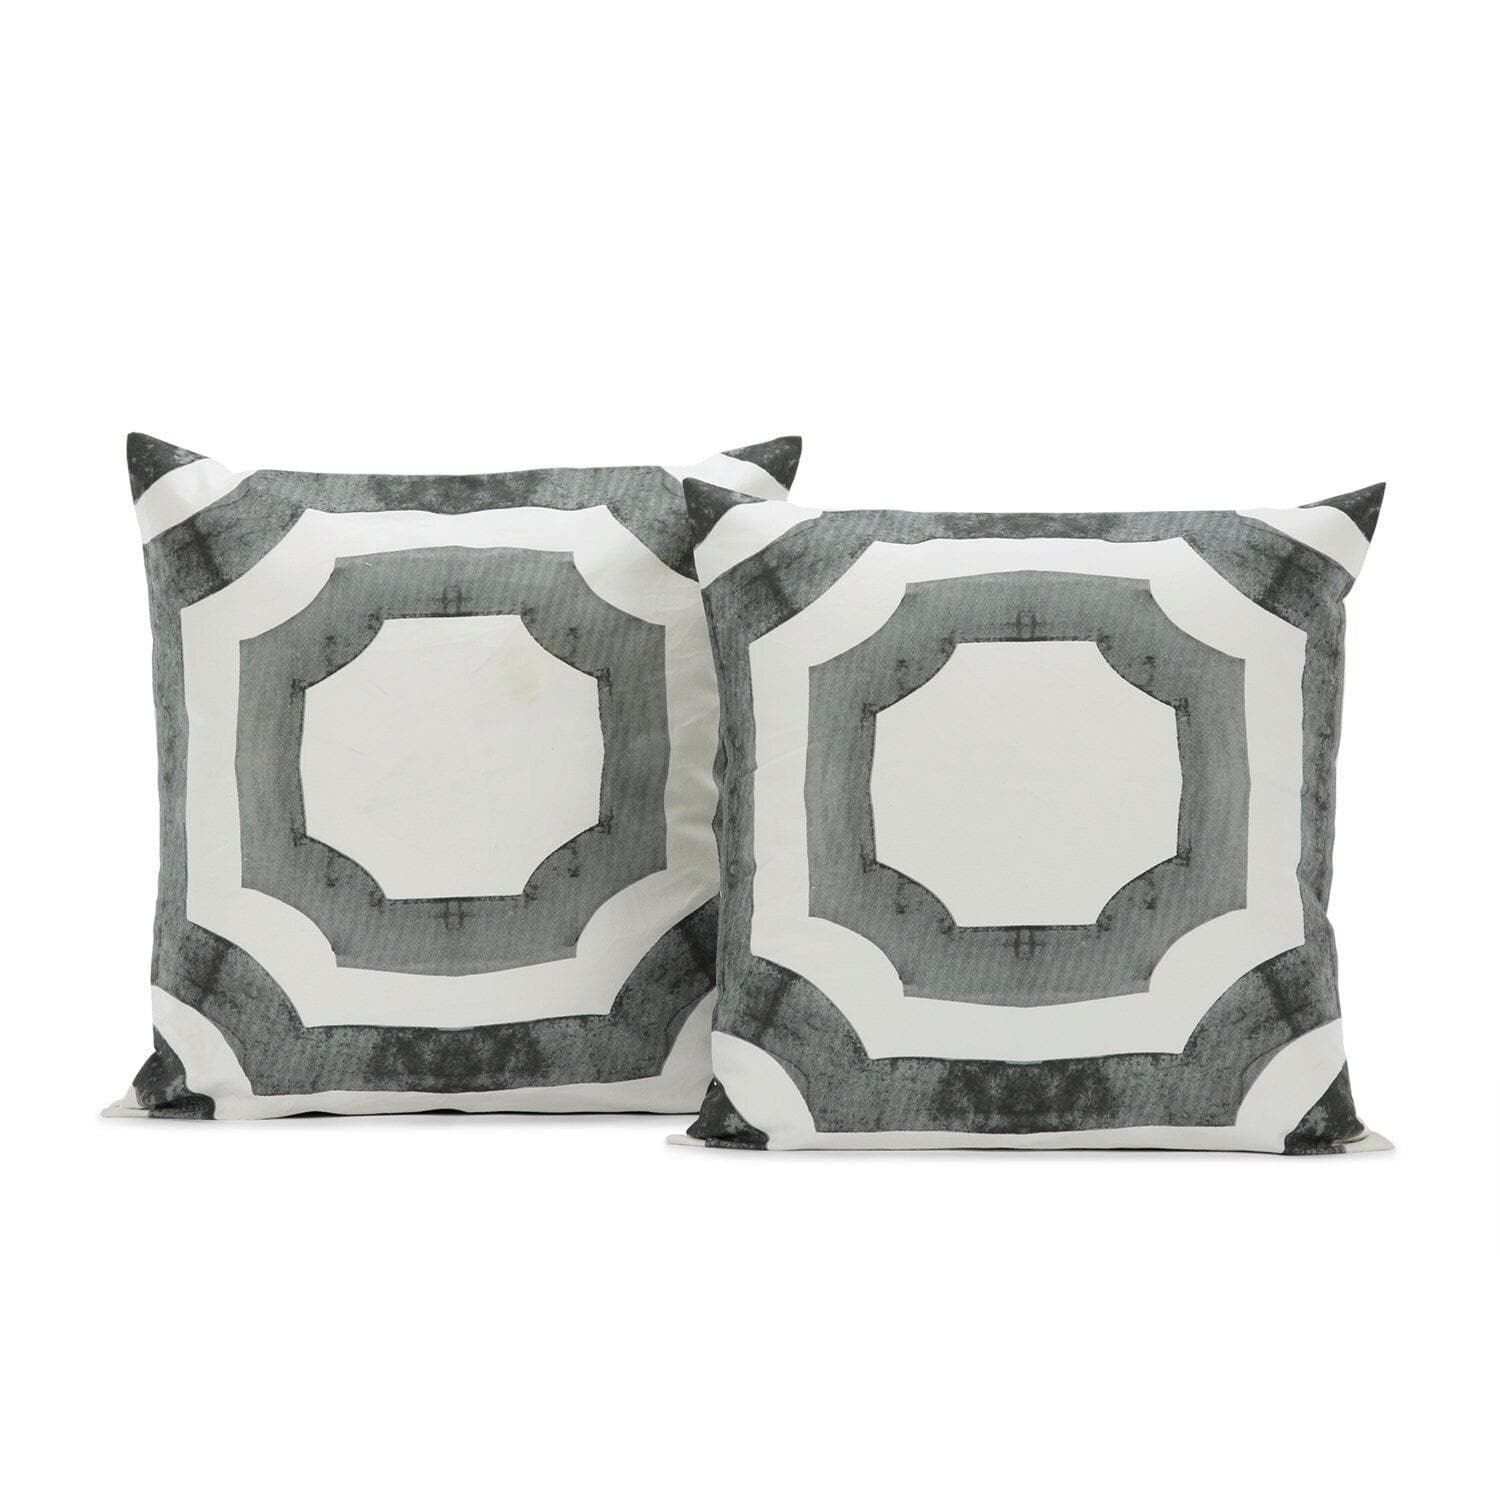 Mecca Steel Printed Cotton Cushion Covers - Pair